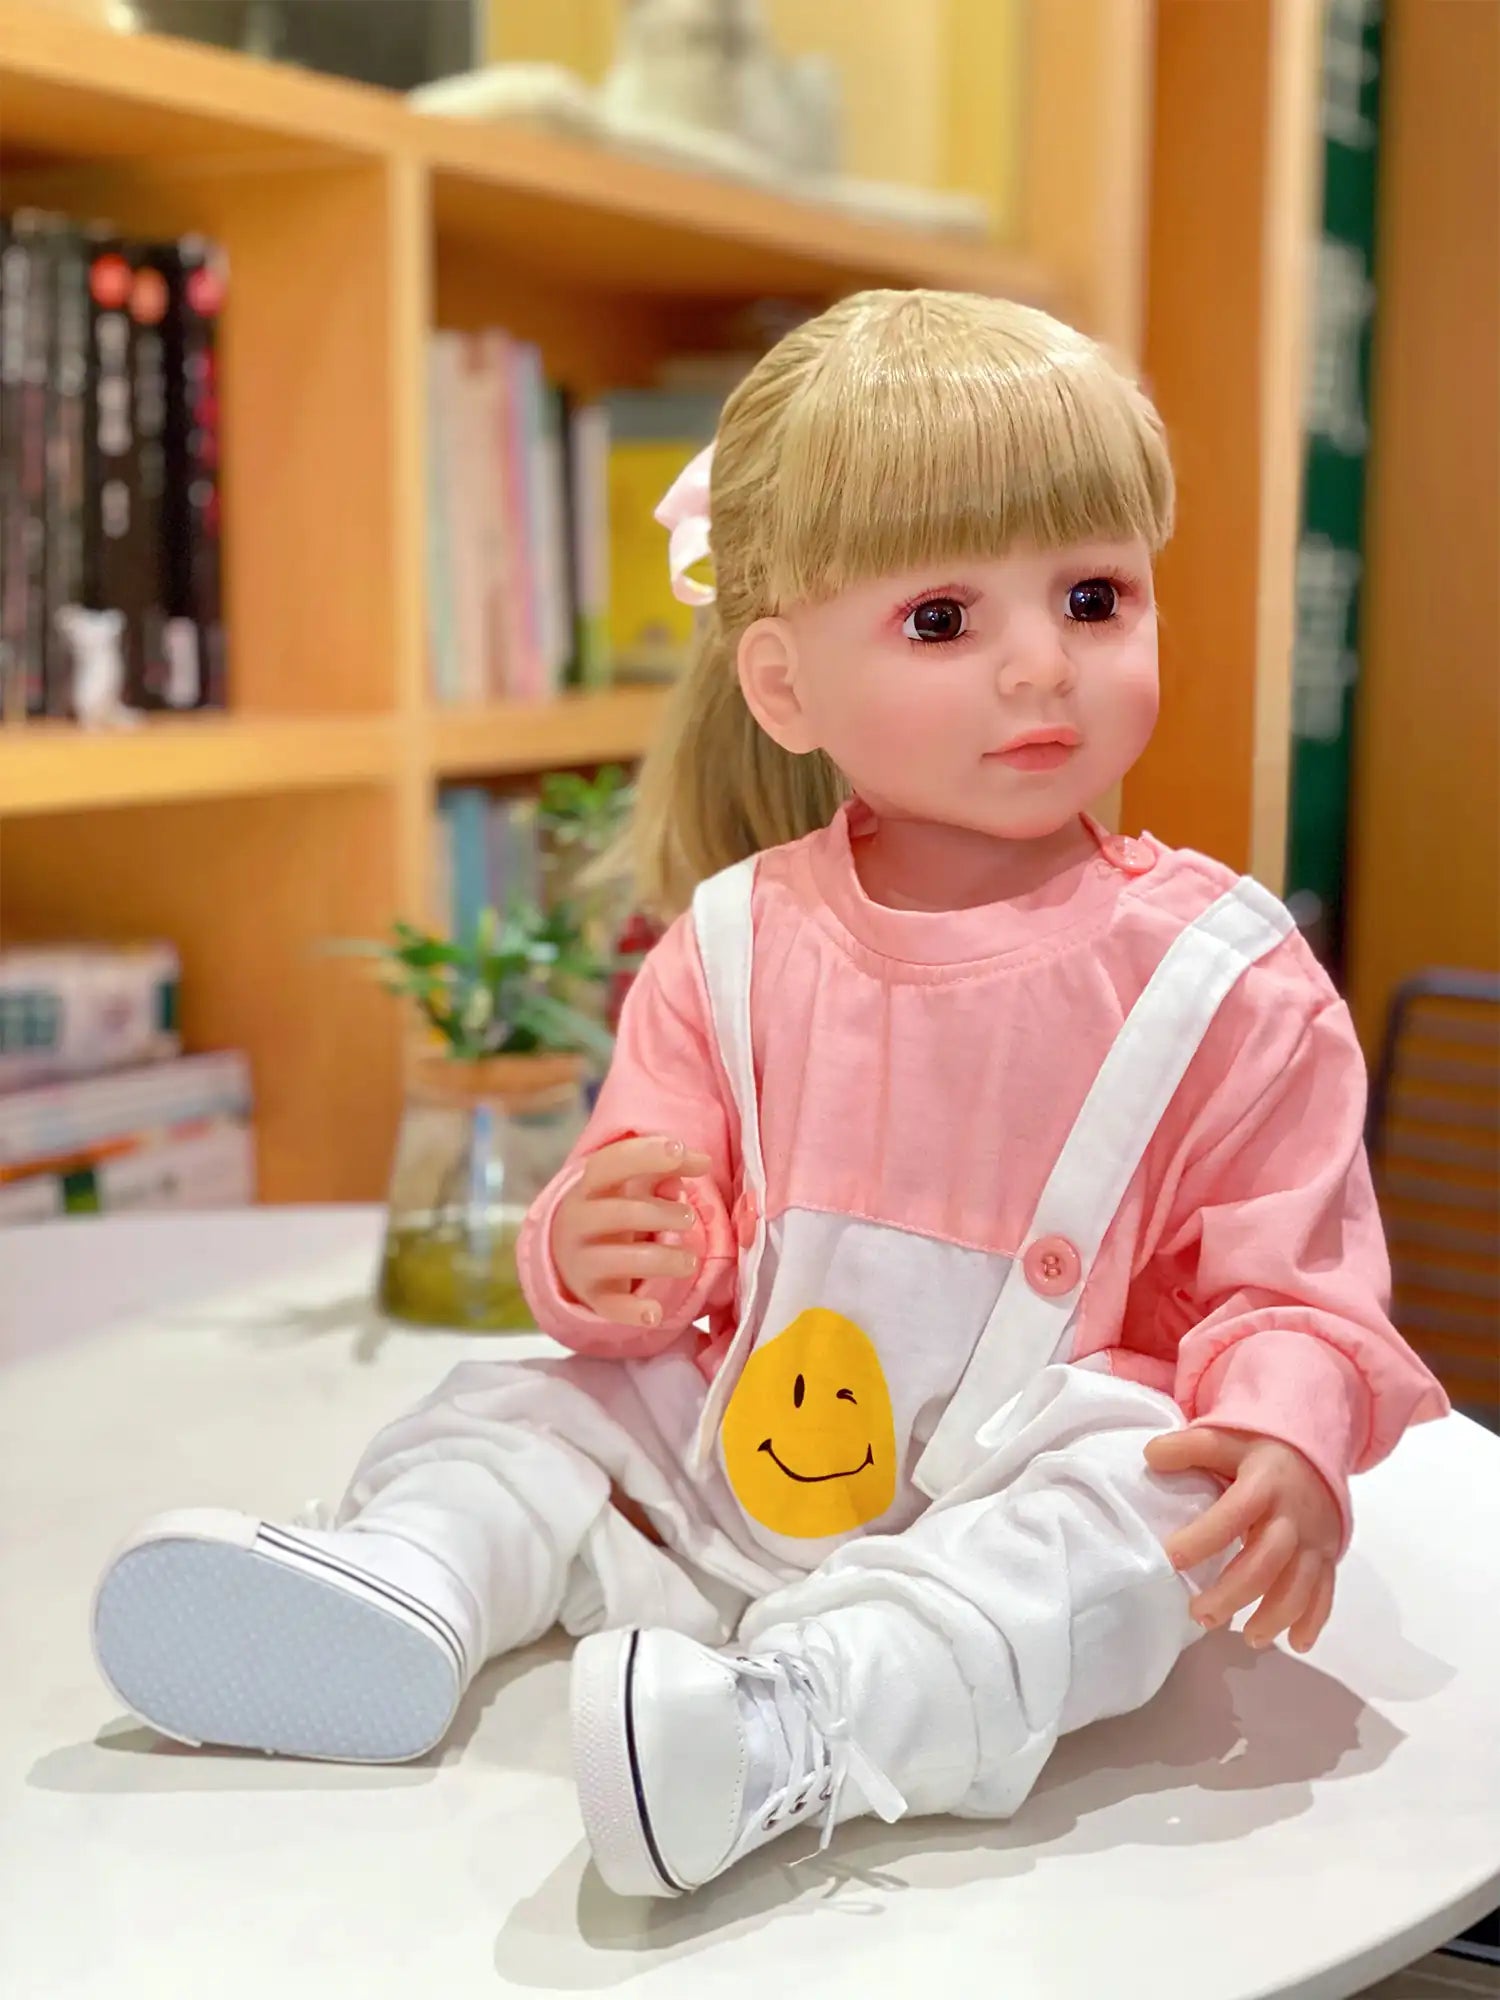 Lifelike doll with soft blonde hair and engaging blue eyes, dressed in casual play attire, in an indoor play setting.